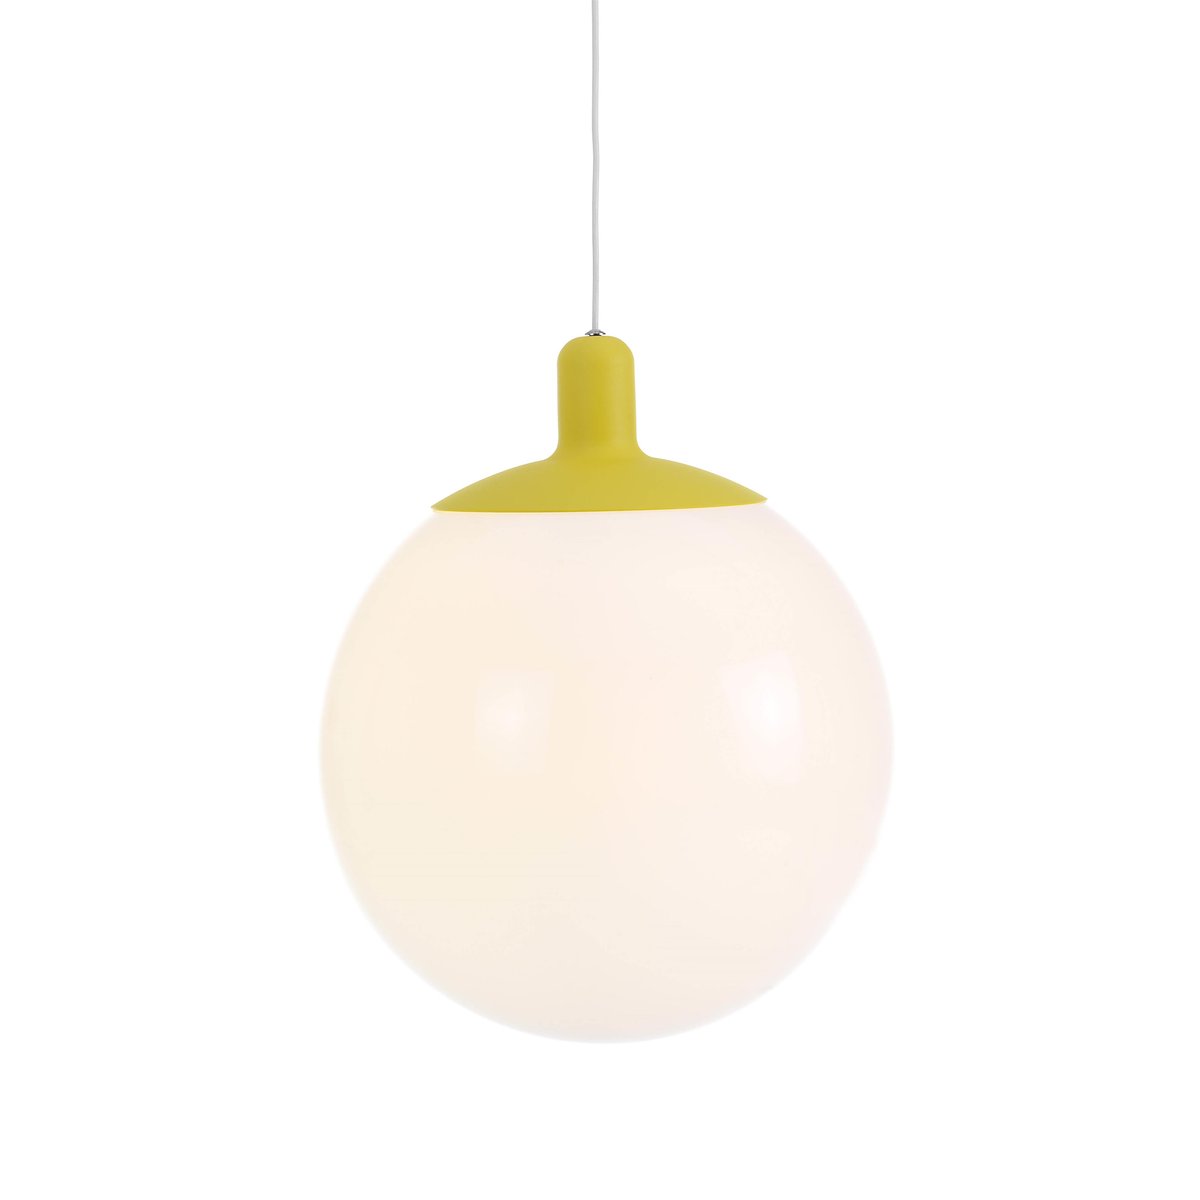 Bsweden Dolly hanglamp wit-geel